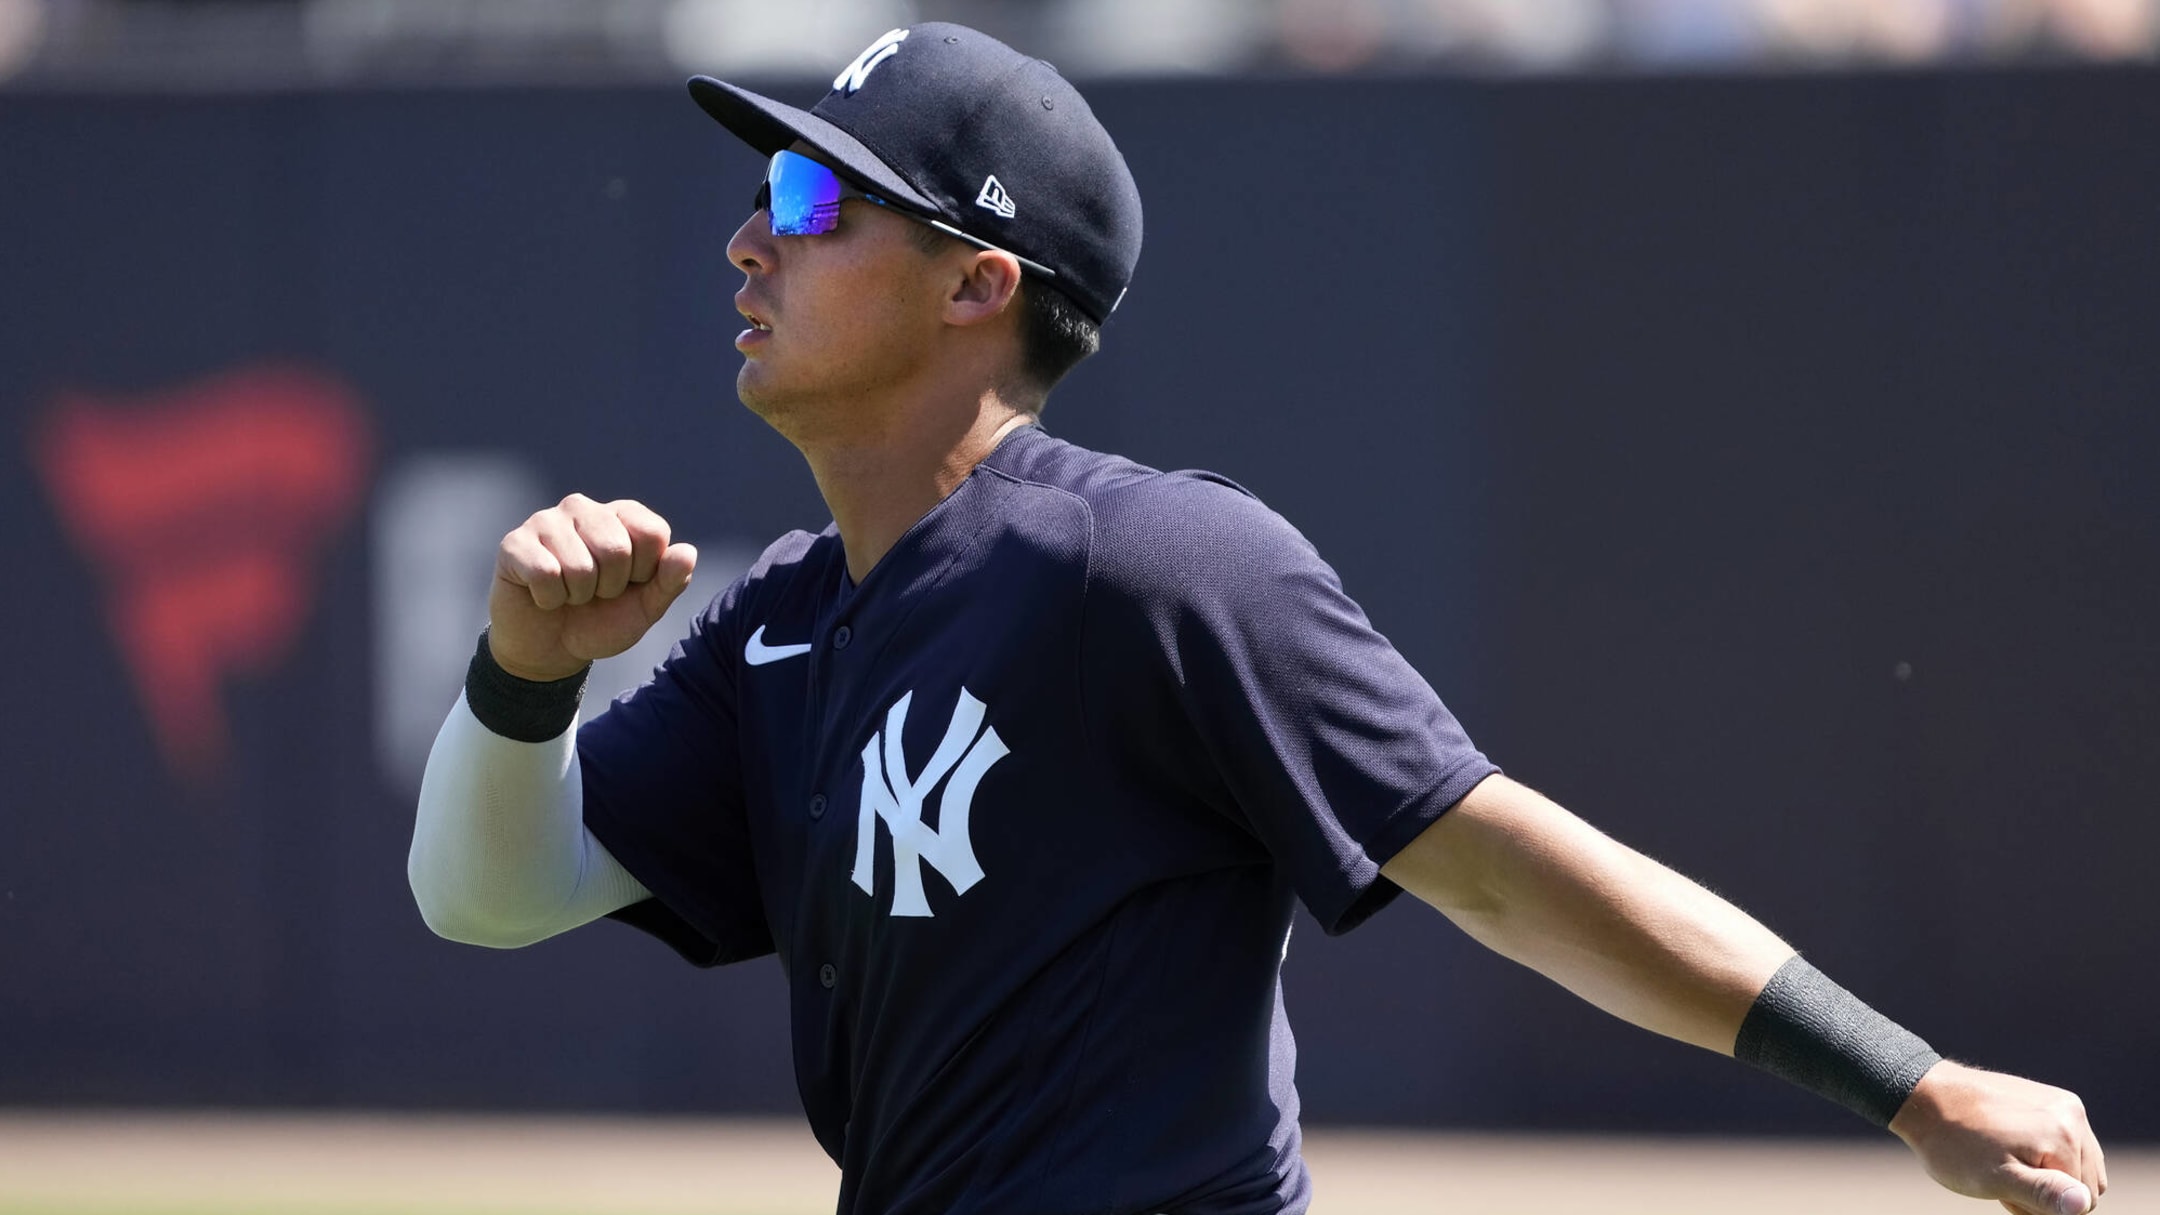 Yankees' Anthony Volpe chooses No. 11: Who else has worn that